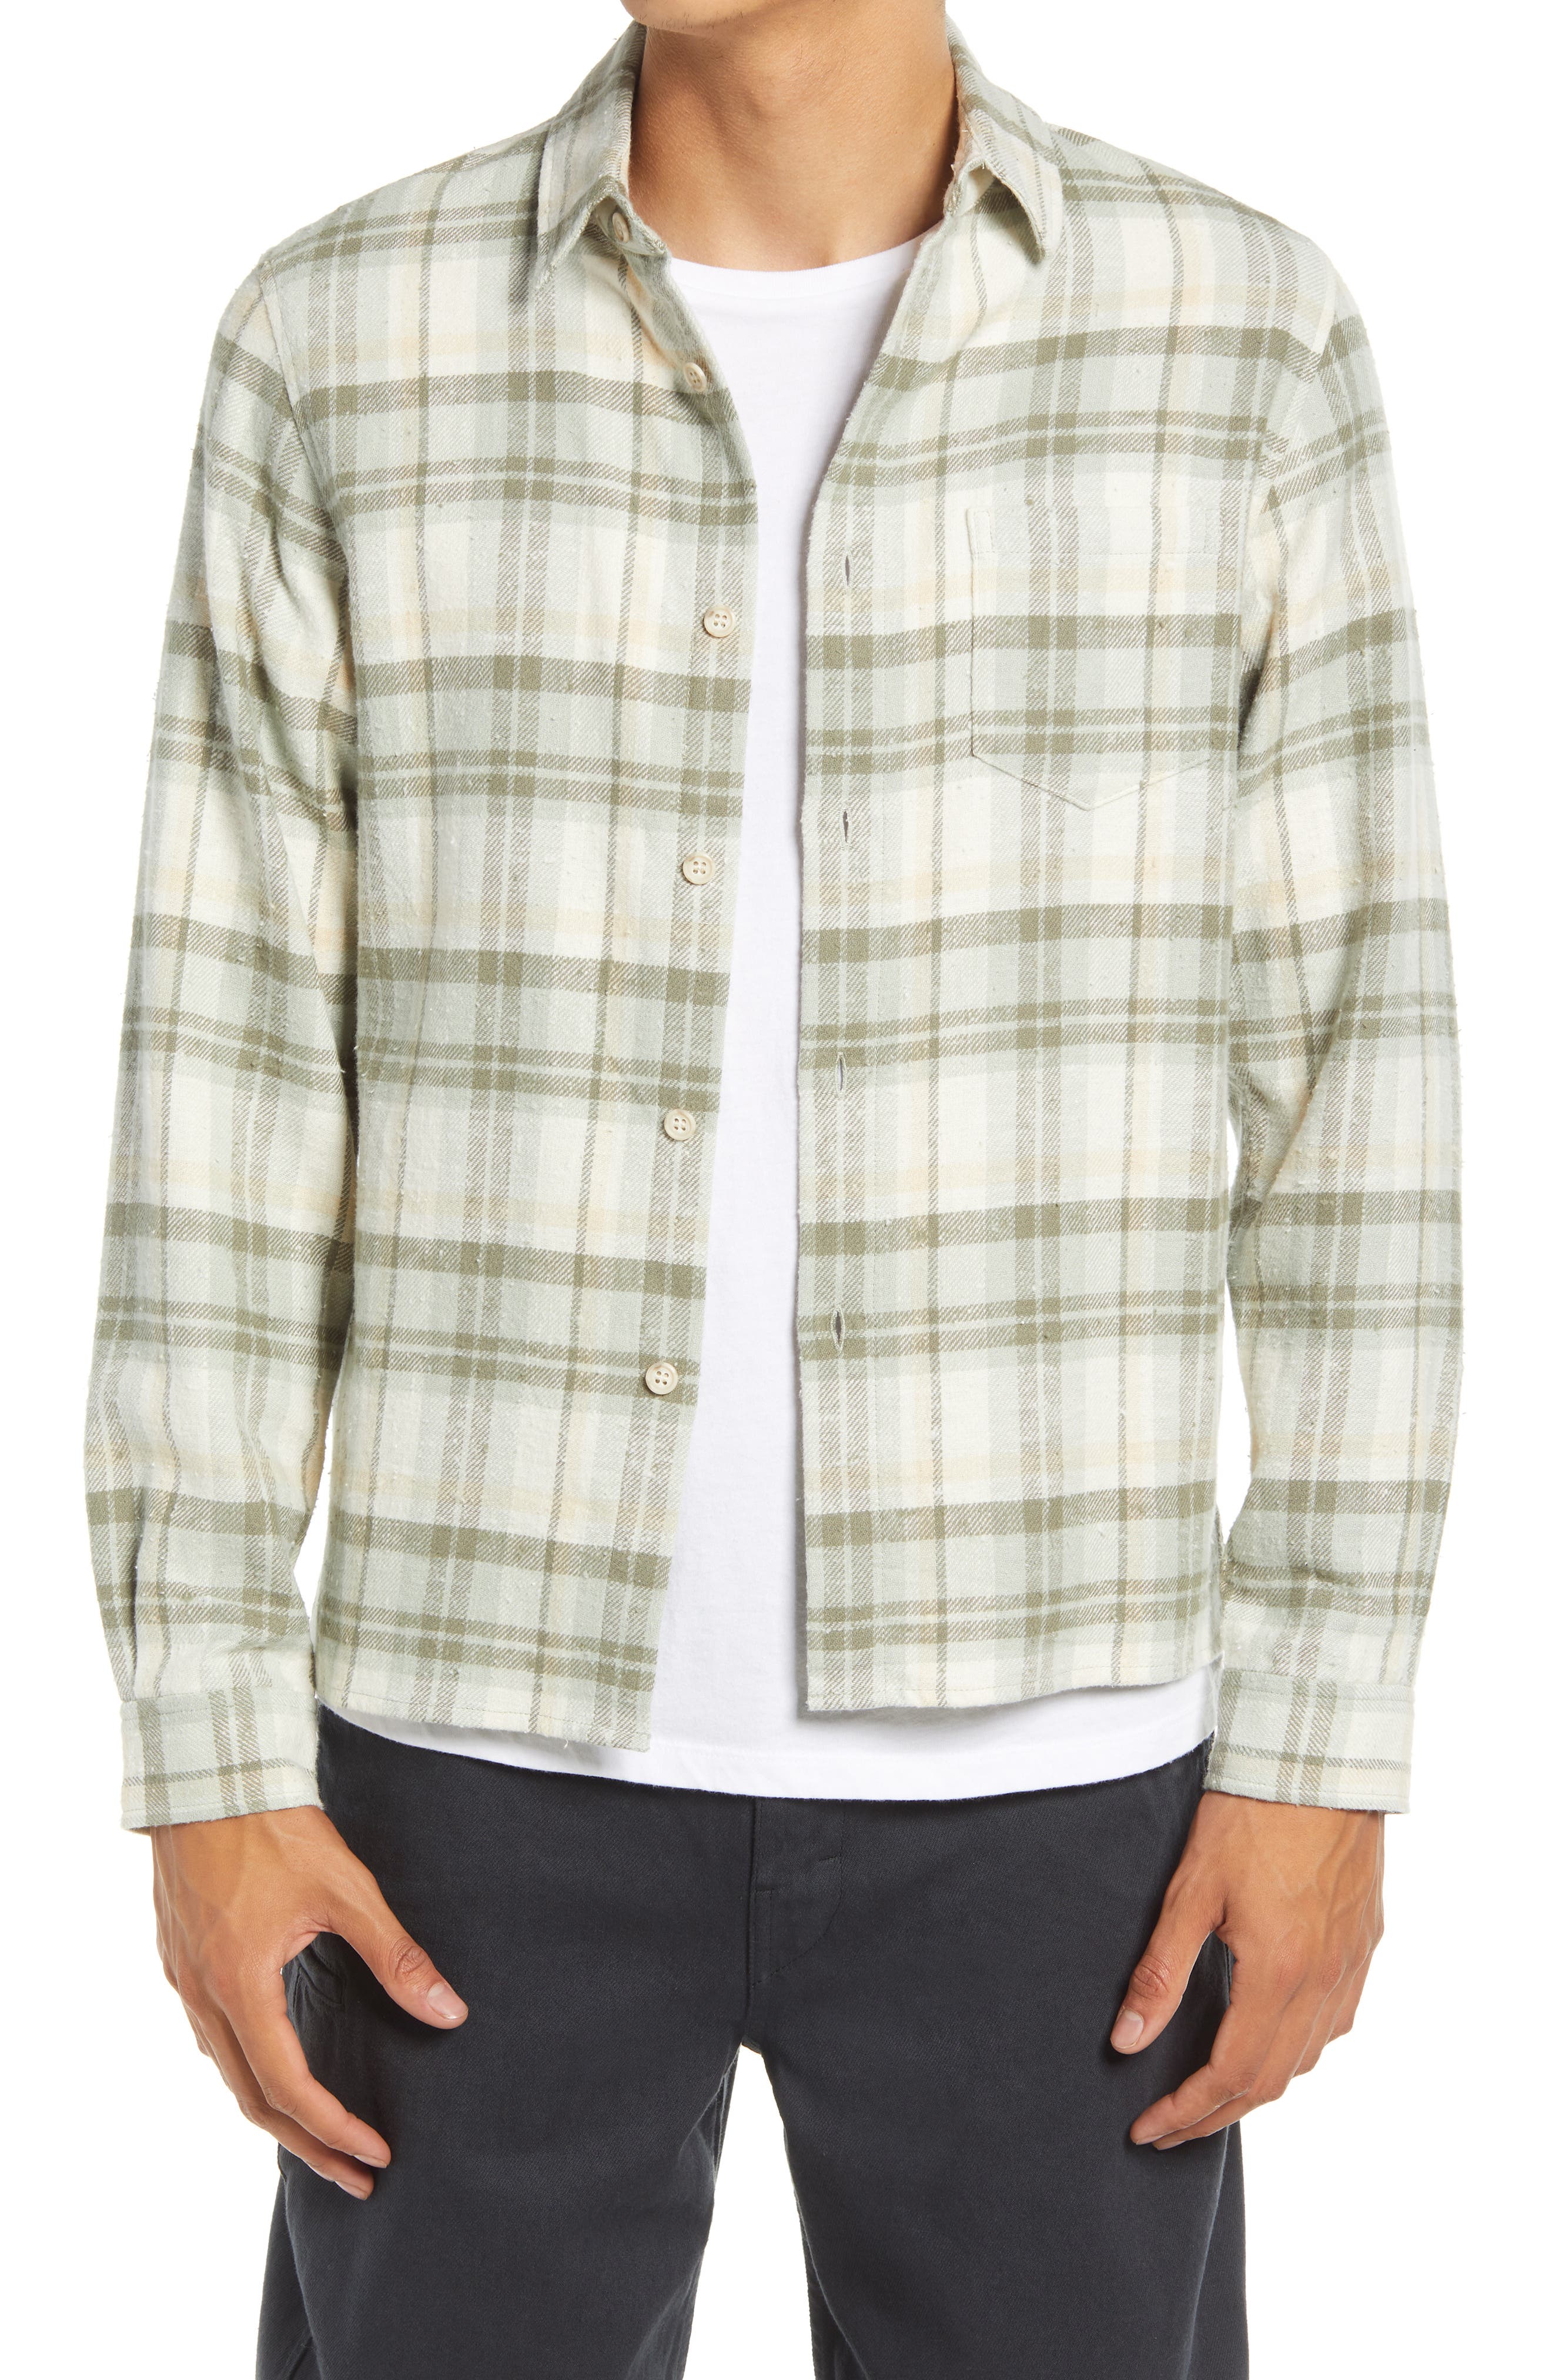 John Elliott Sly Plaid Flannel Button-Up Shirt Jacket in Lone Pine Check at Nordstrom, Size Small